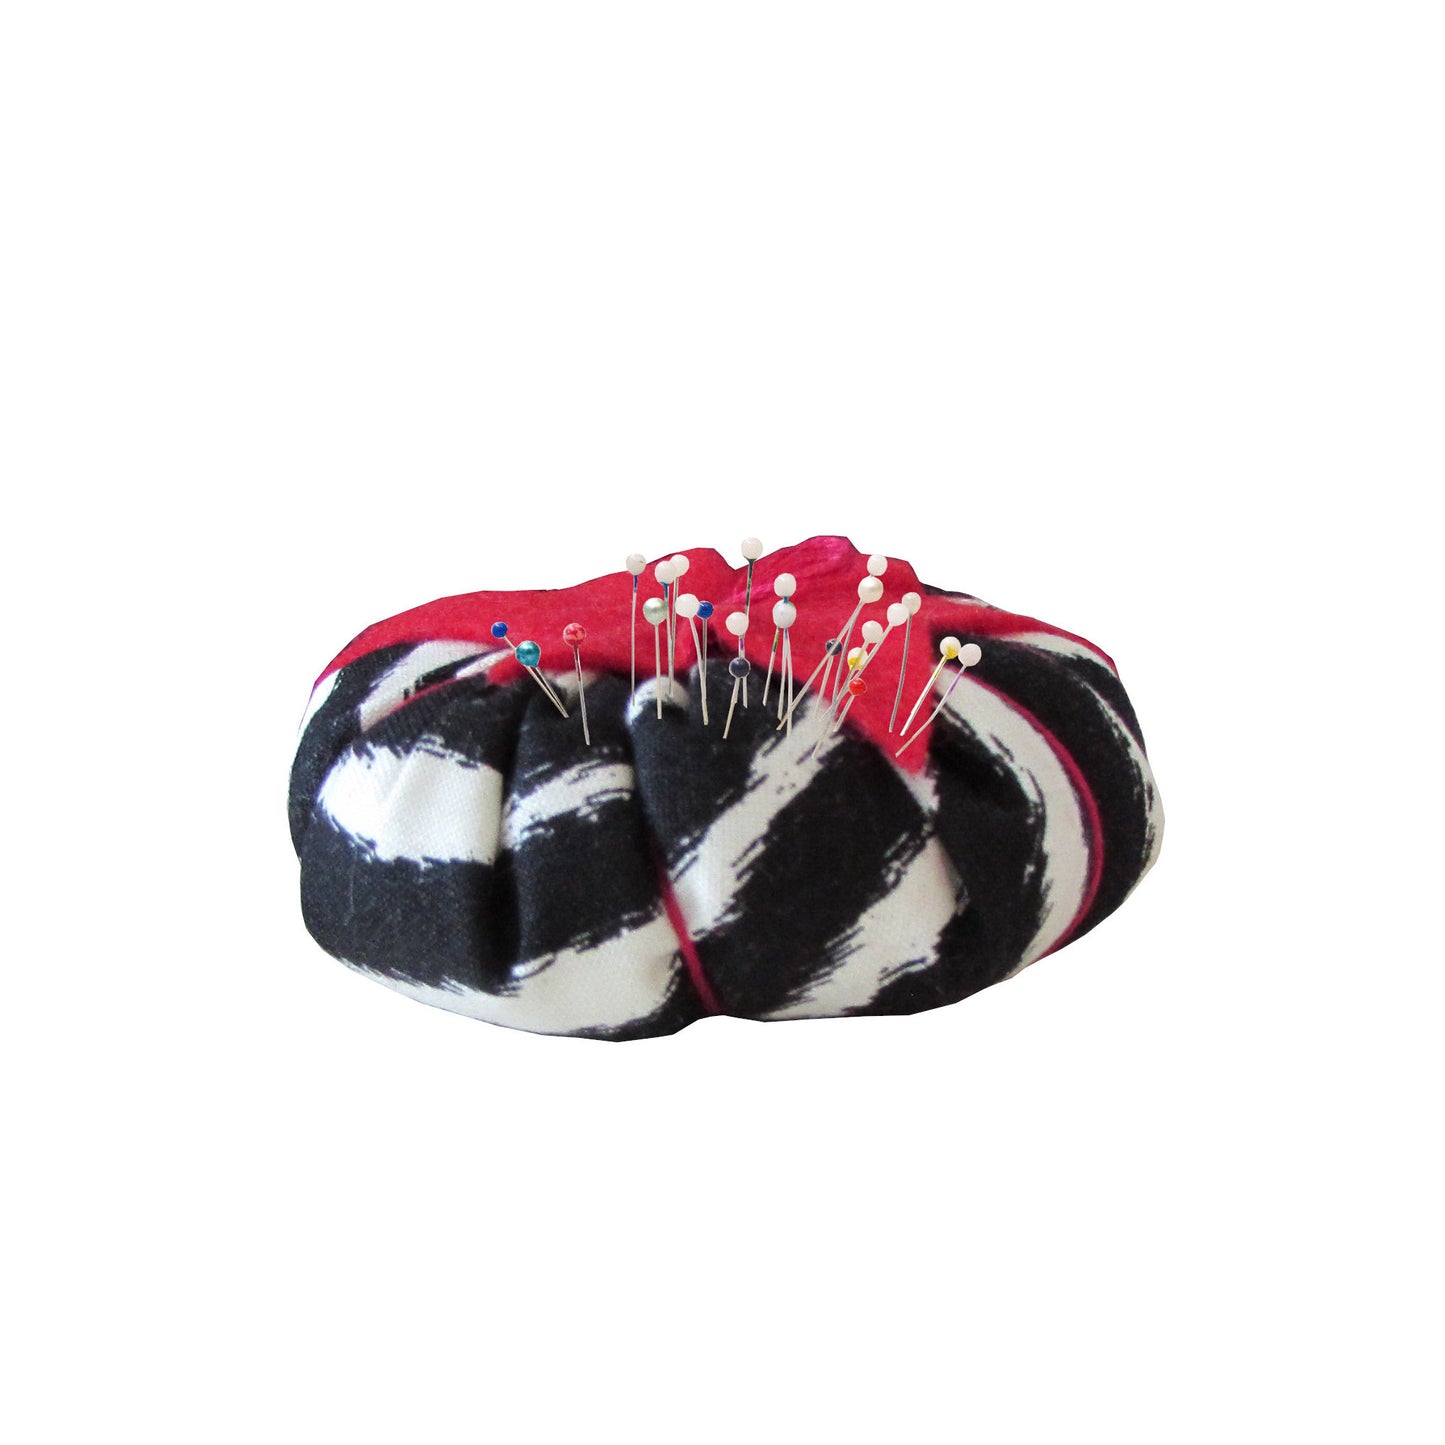 Red Top Zebra Print Pincushion with pins